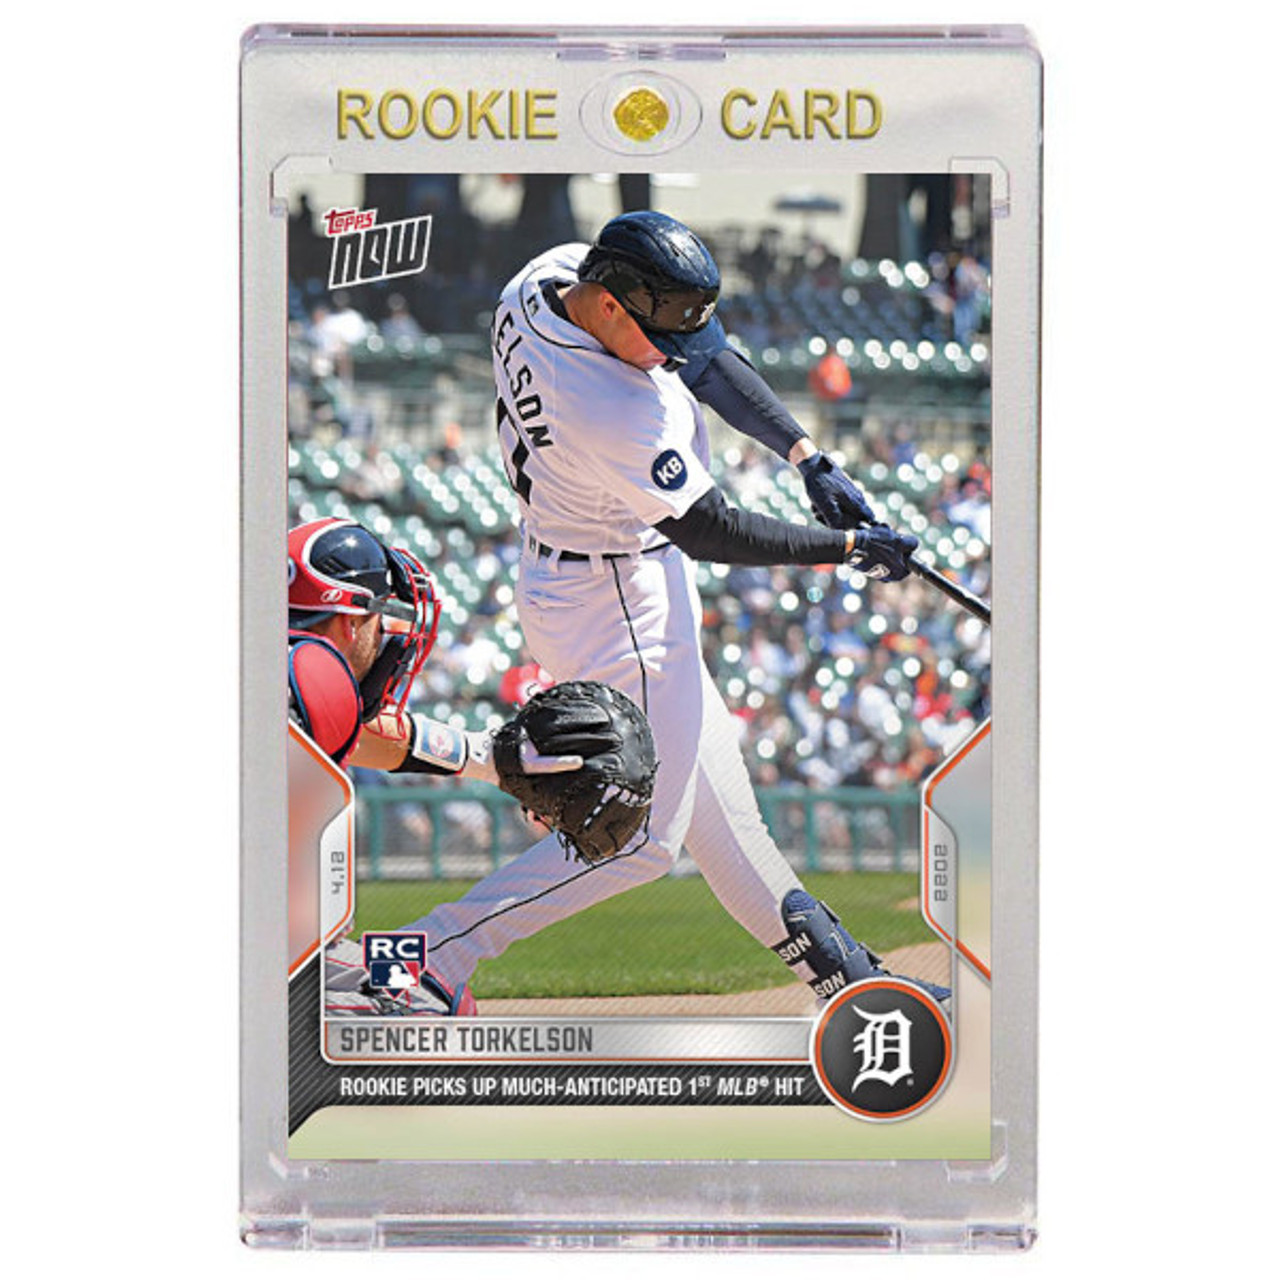 SPENCER TORKELSON ROOKIE CARD Detroit Tigers MOJO REFRACTOR $$ Bowman  Chrome RC!